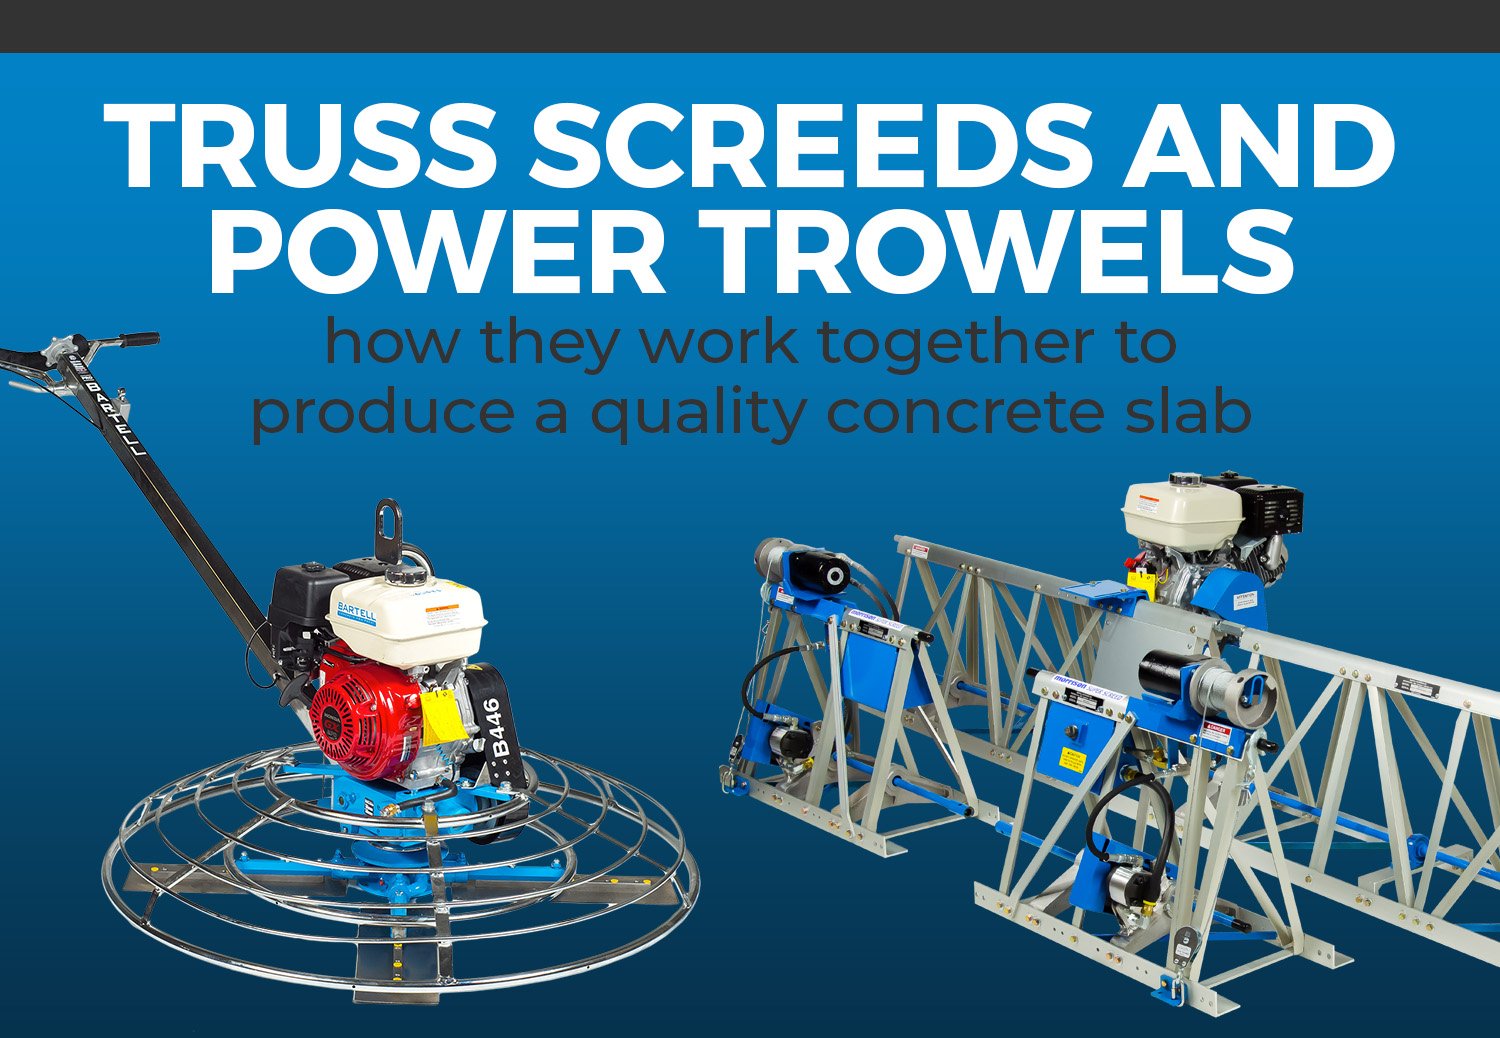 Truss Screed and Power Trowels: How They Work Together to Produce a Quality Concrete Slab​